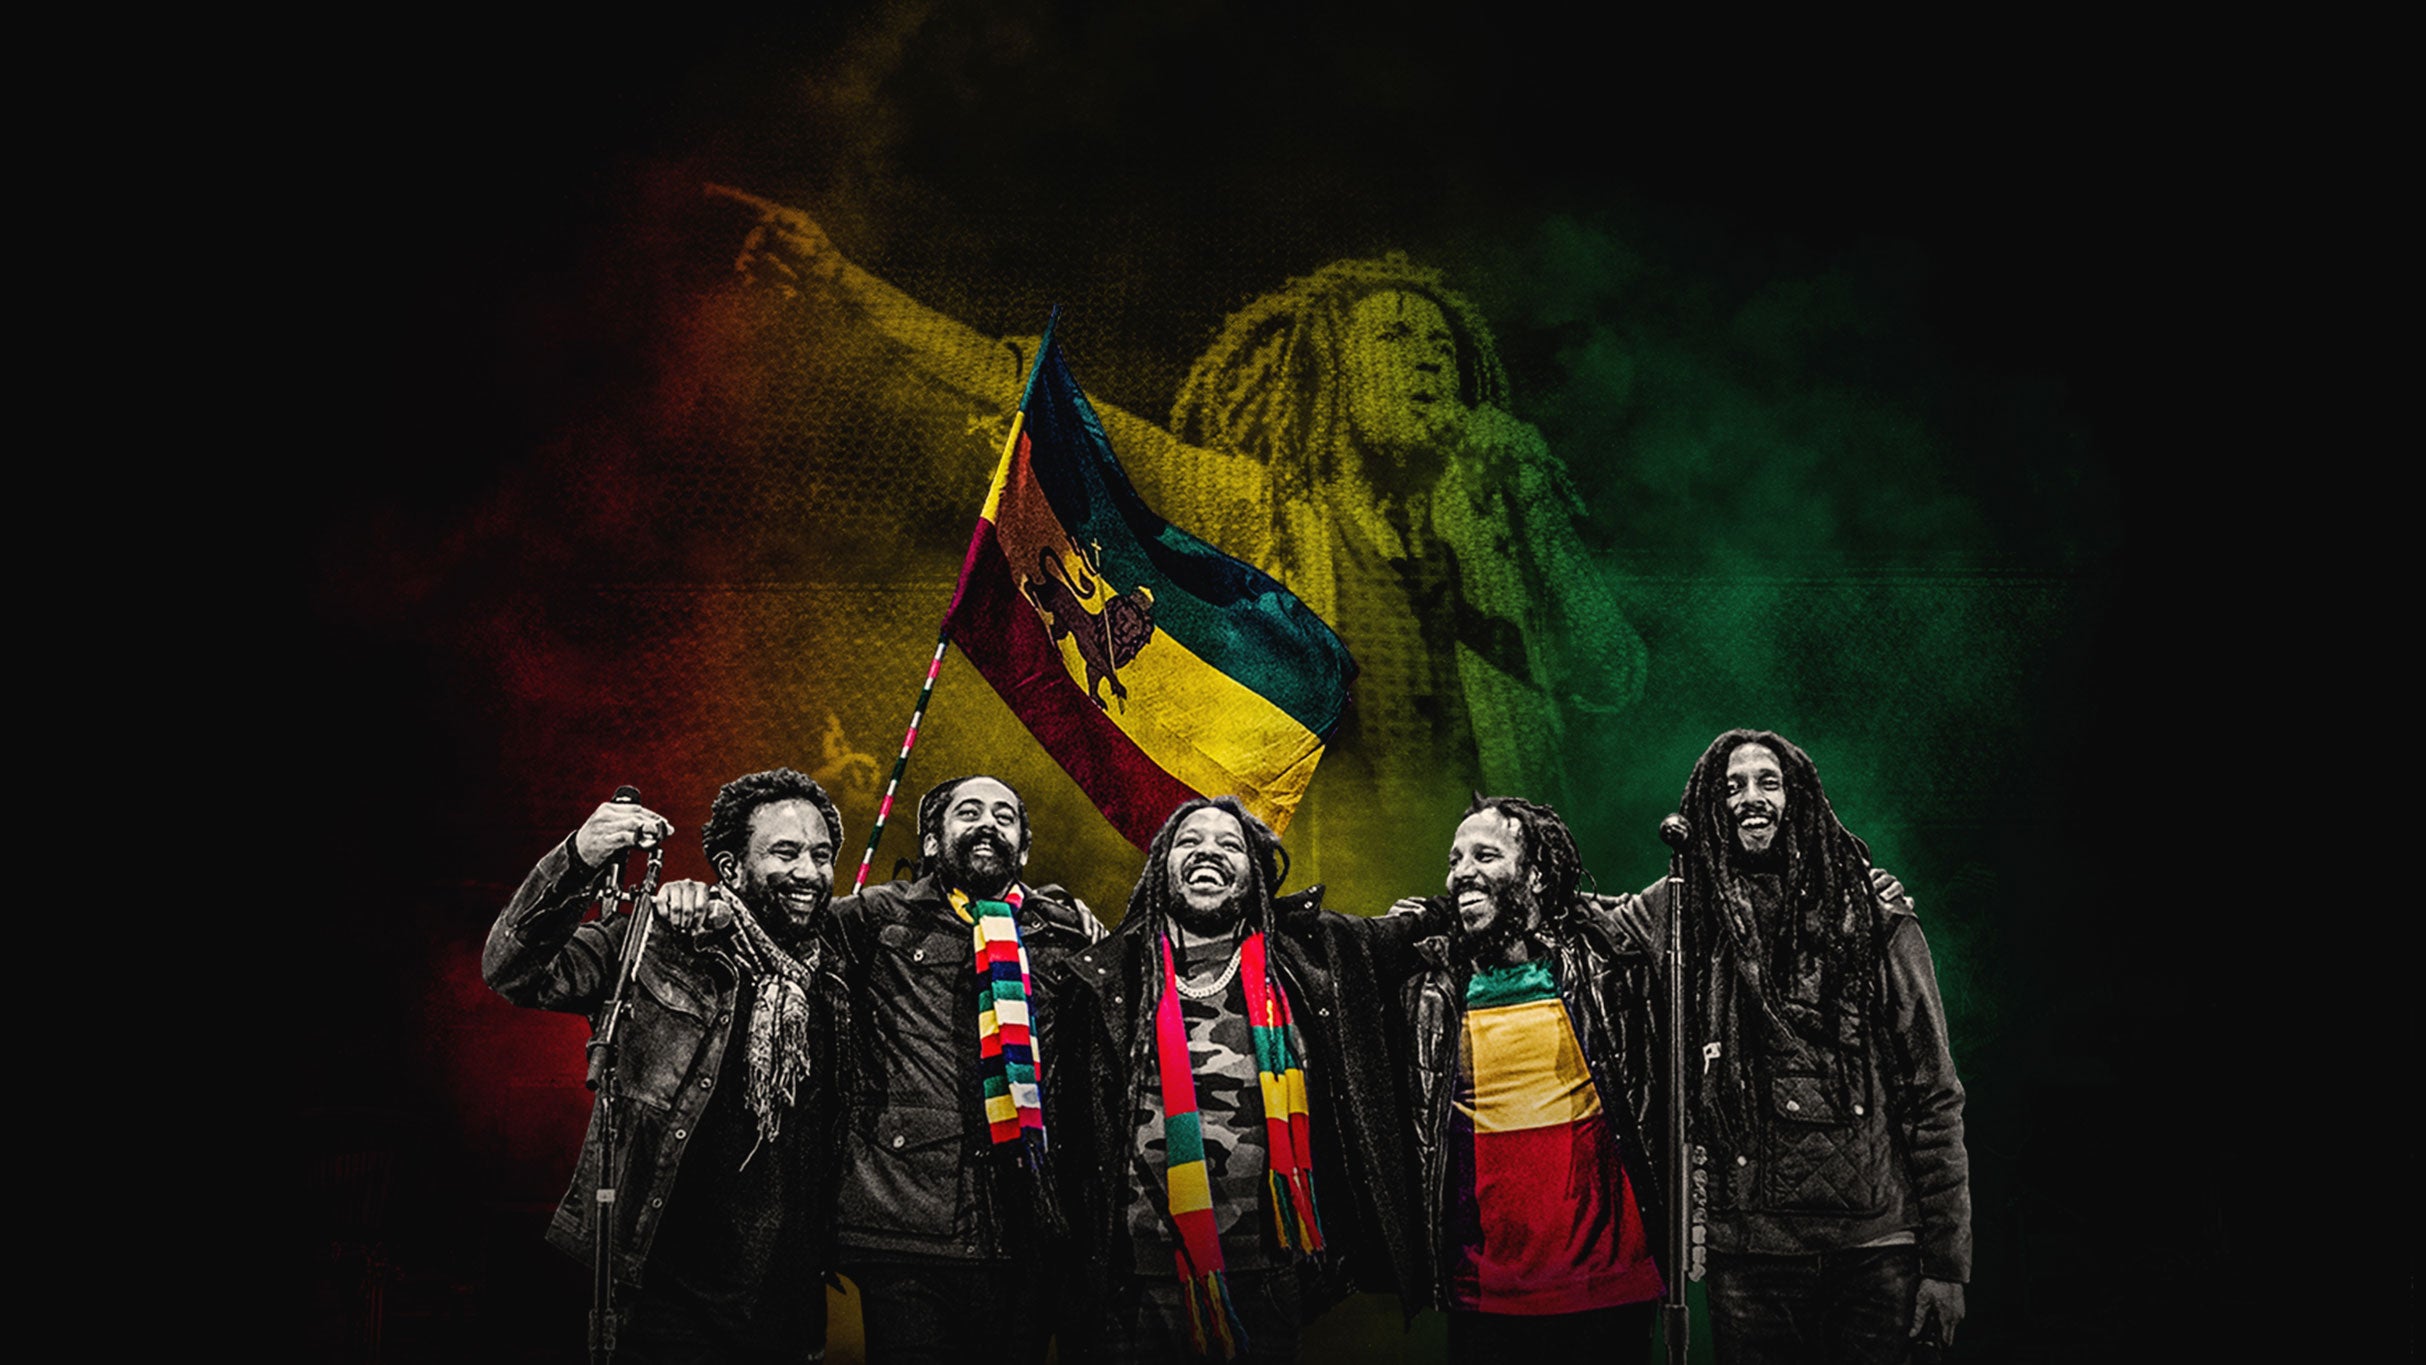 exclusive presale password to The Marley Brothers: The Legacy Tour advanced tickets in Cincinnati at Riverbend Music Center